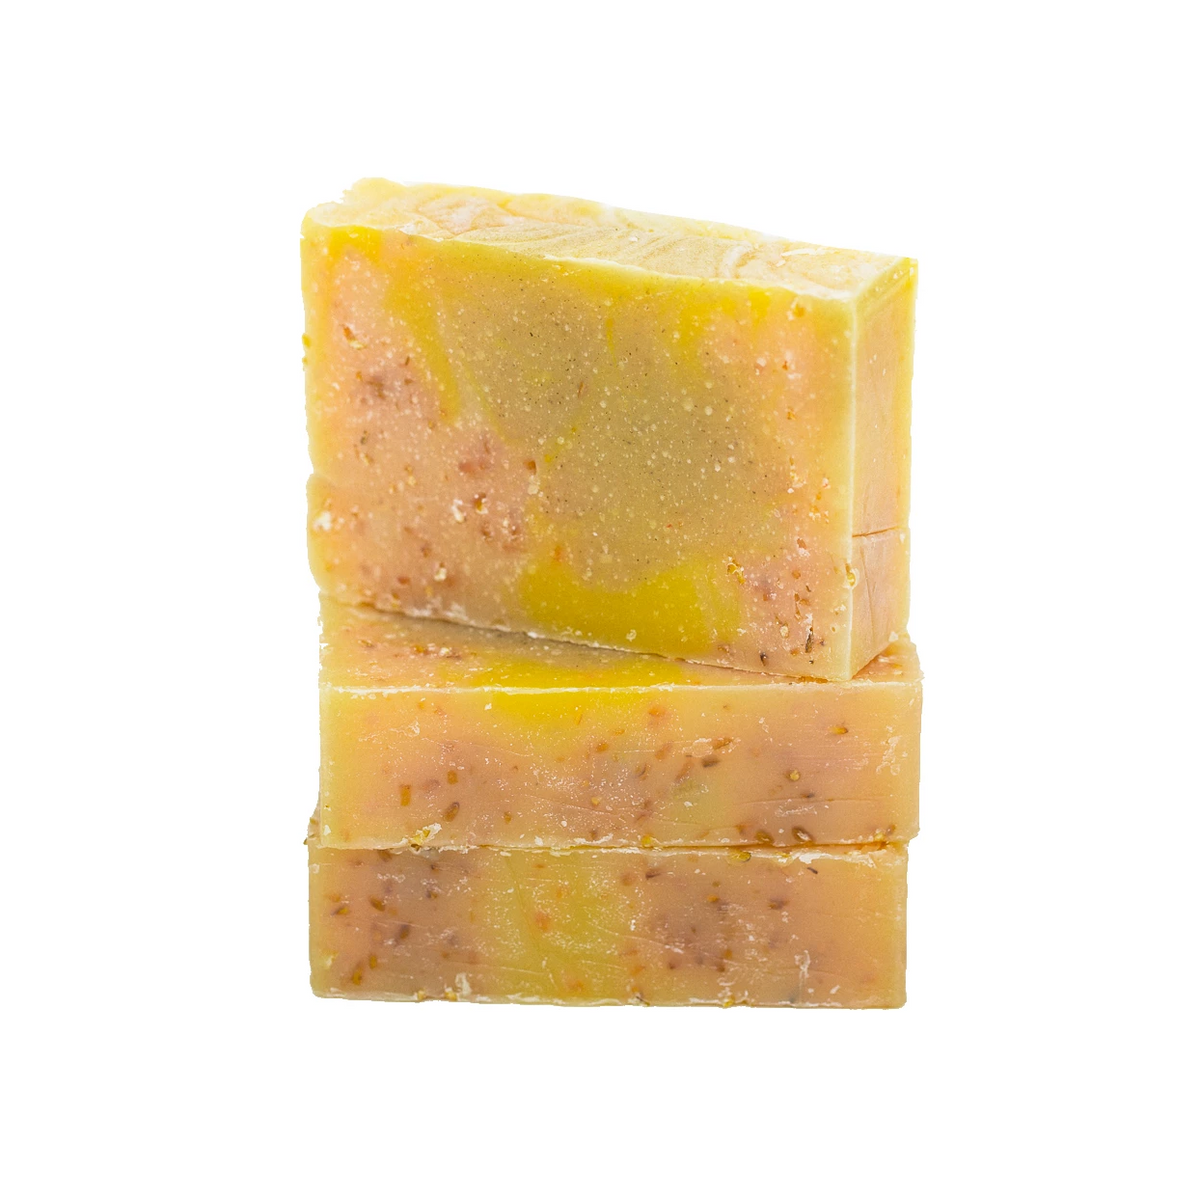 Stack of swirling orange and yellow bar soaps speckled with oatmeal - Moxxie Lemongrass and Oatmeal bar soap